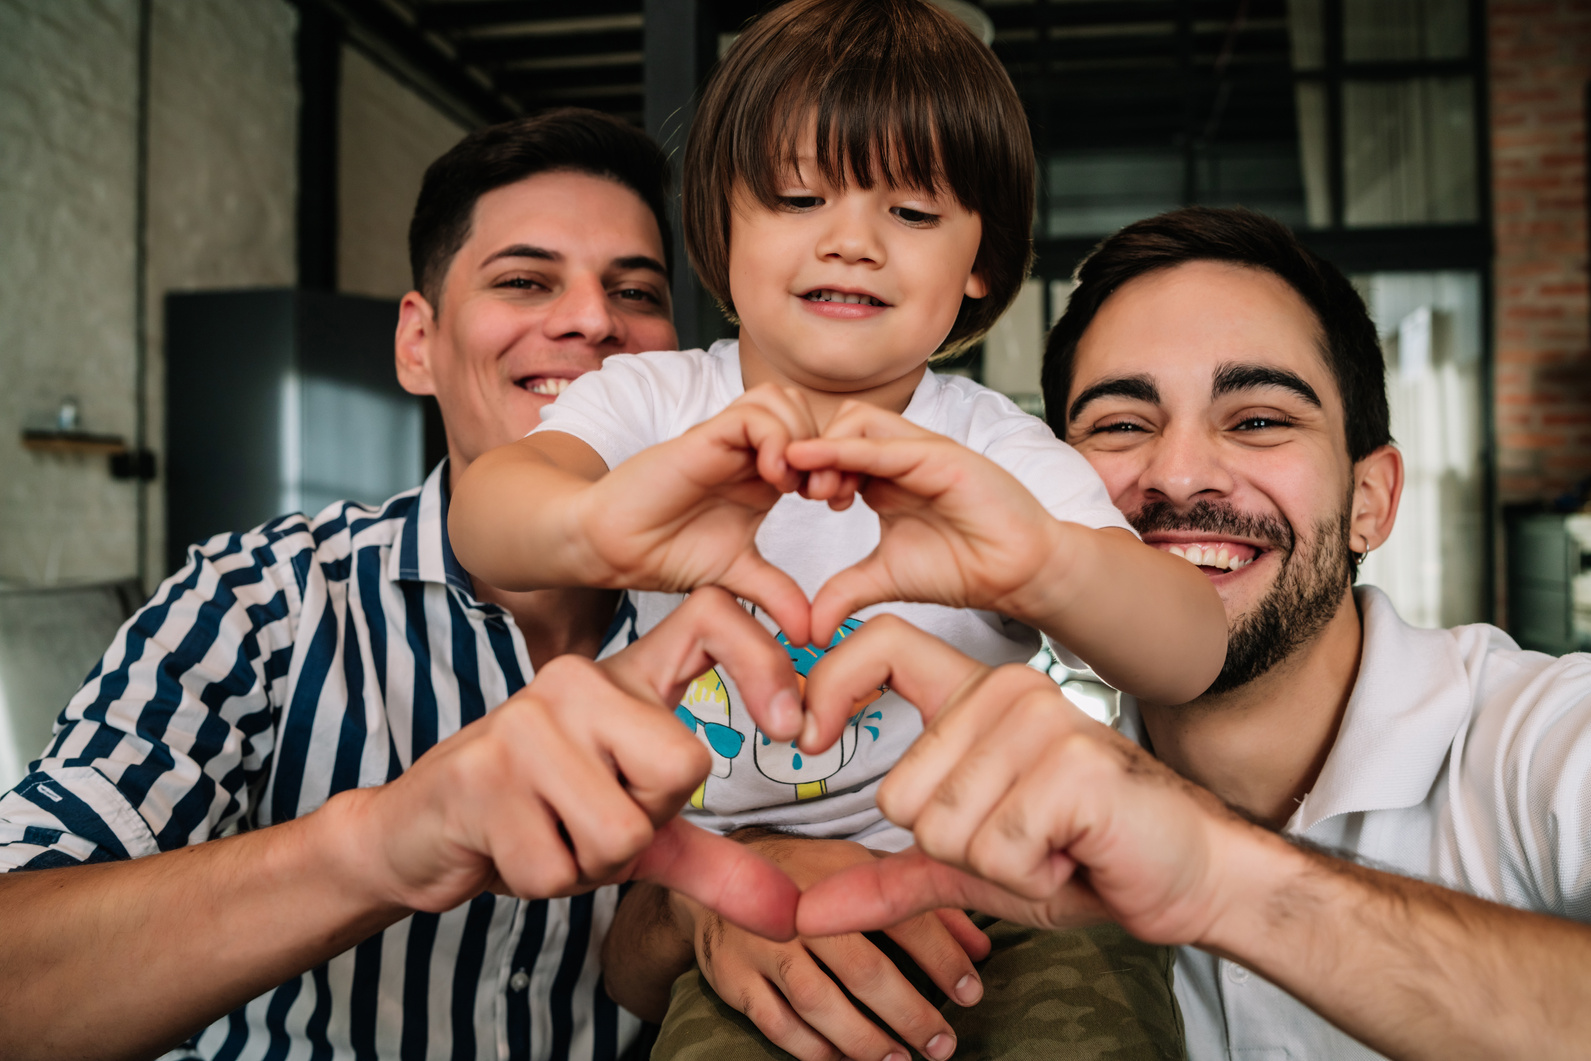 A smiling gay couple poses with their son. They are making heart shapes with their hands.